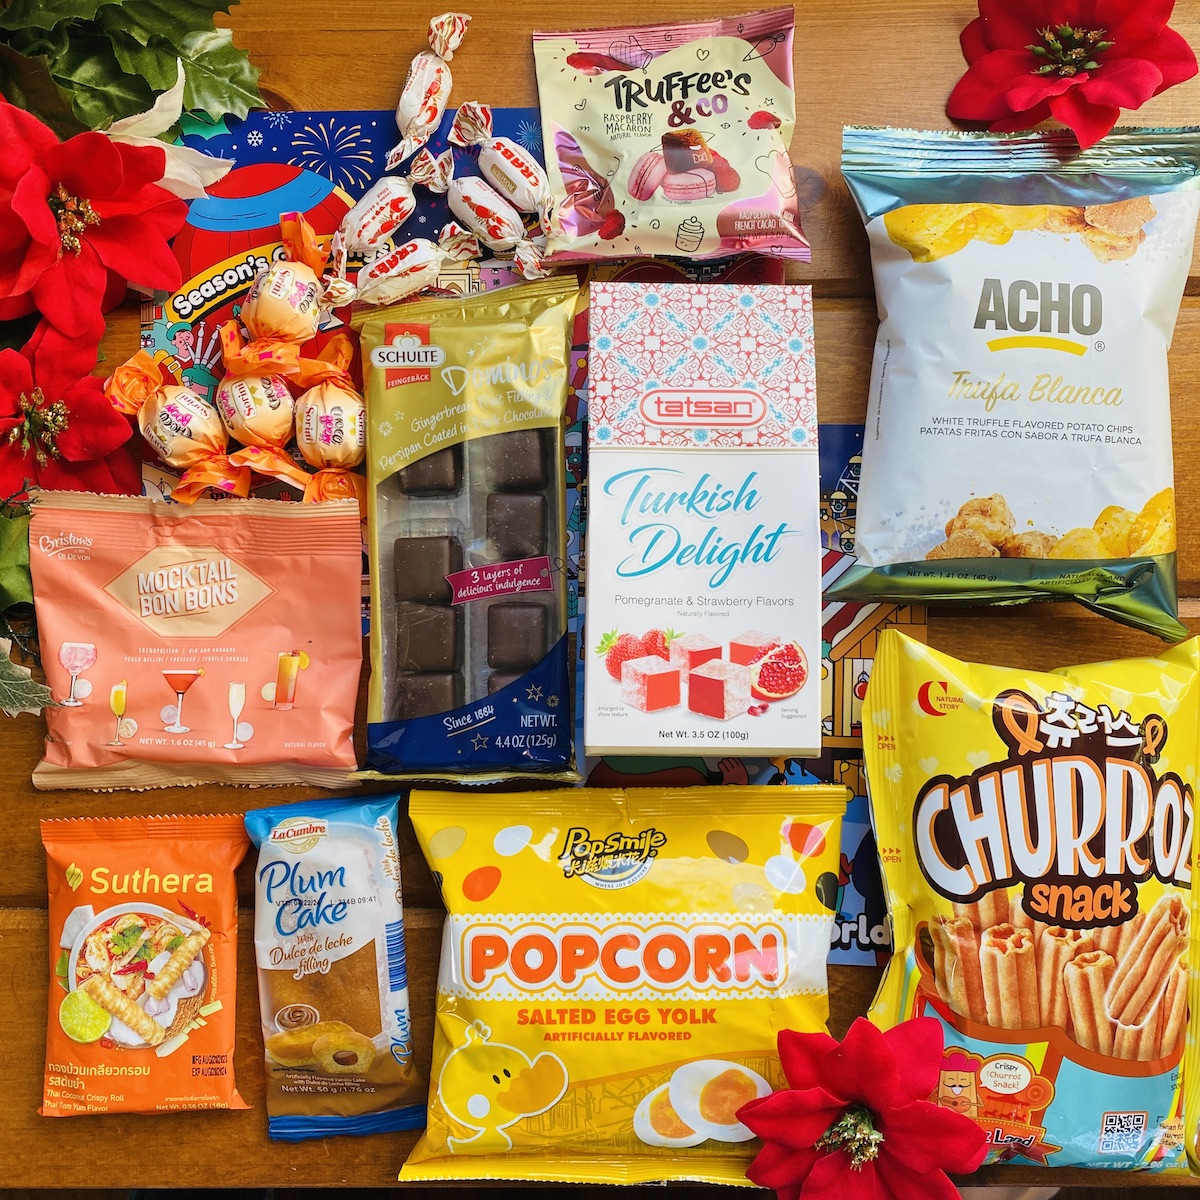 Universal Yums! June 2015 Snack Box Review - NY Foodie Family